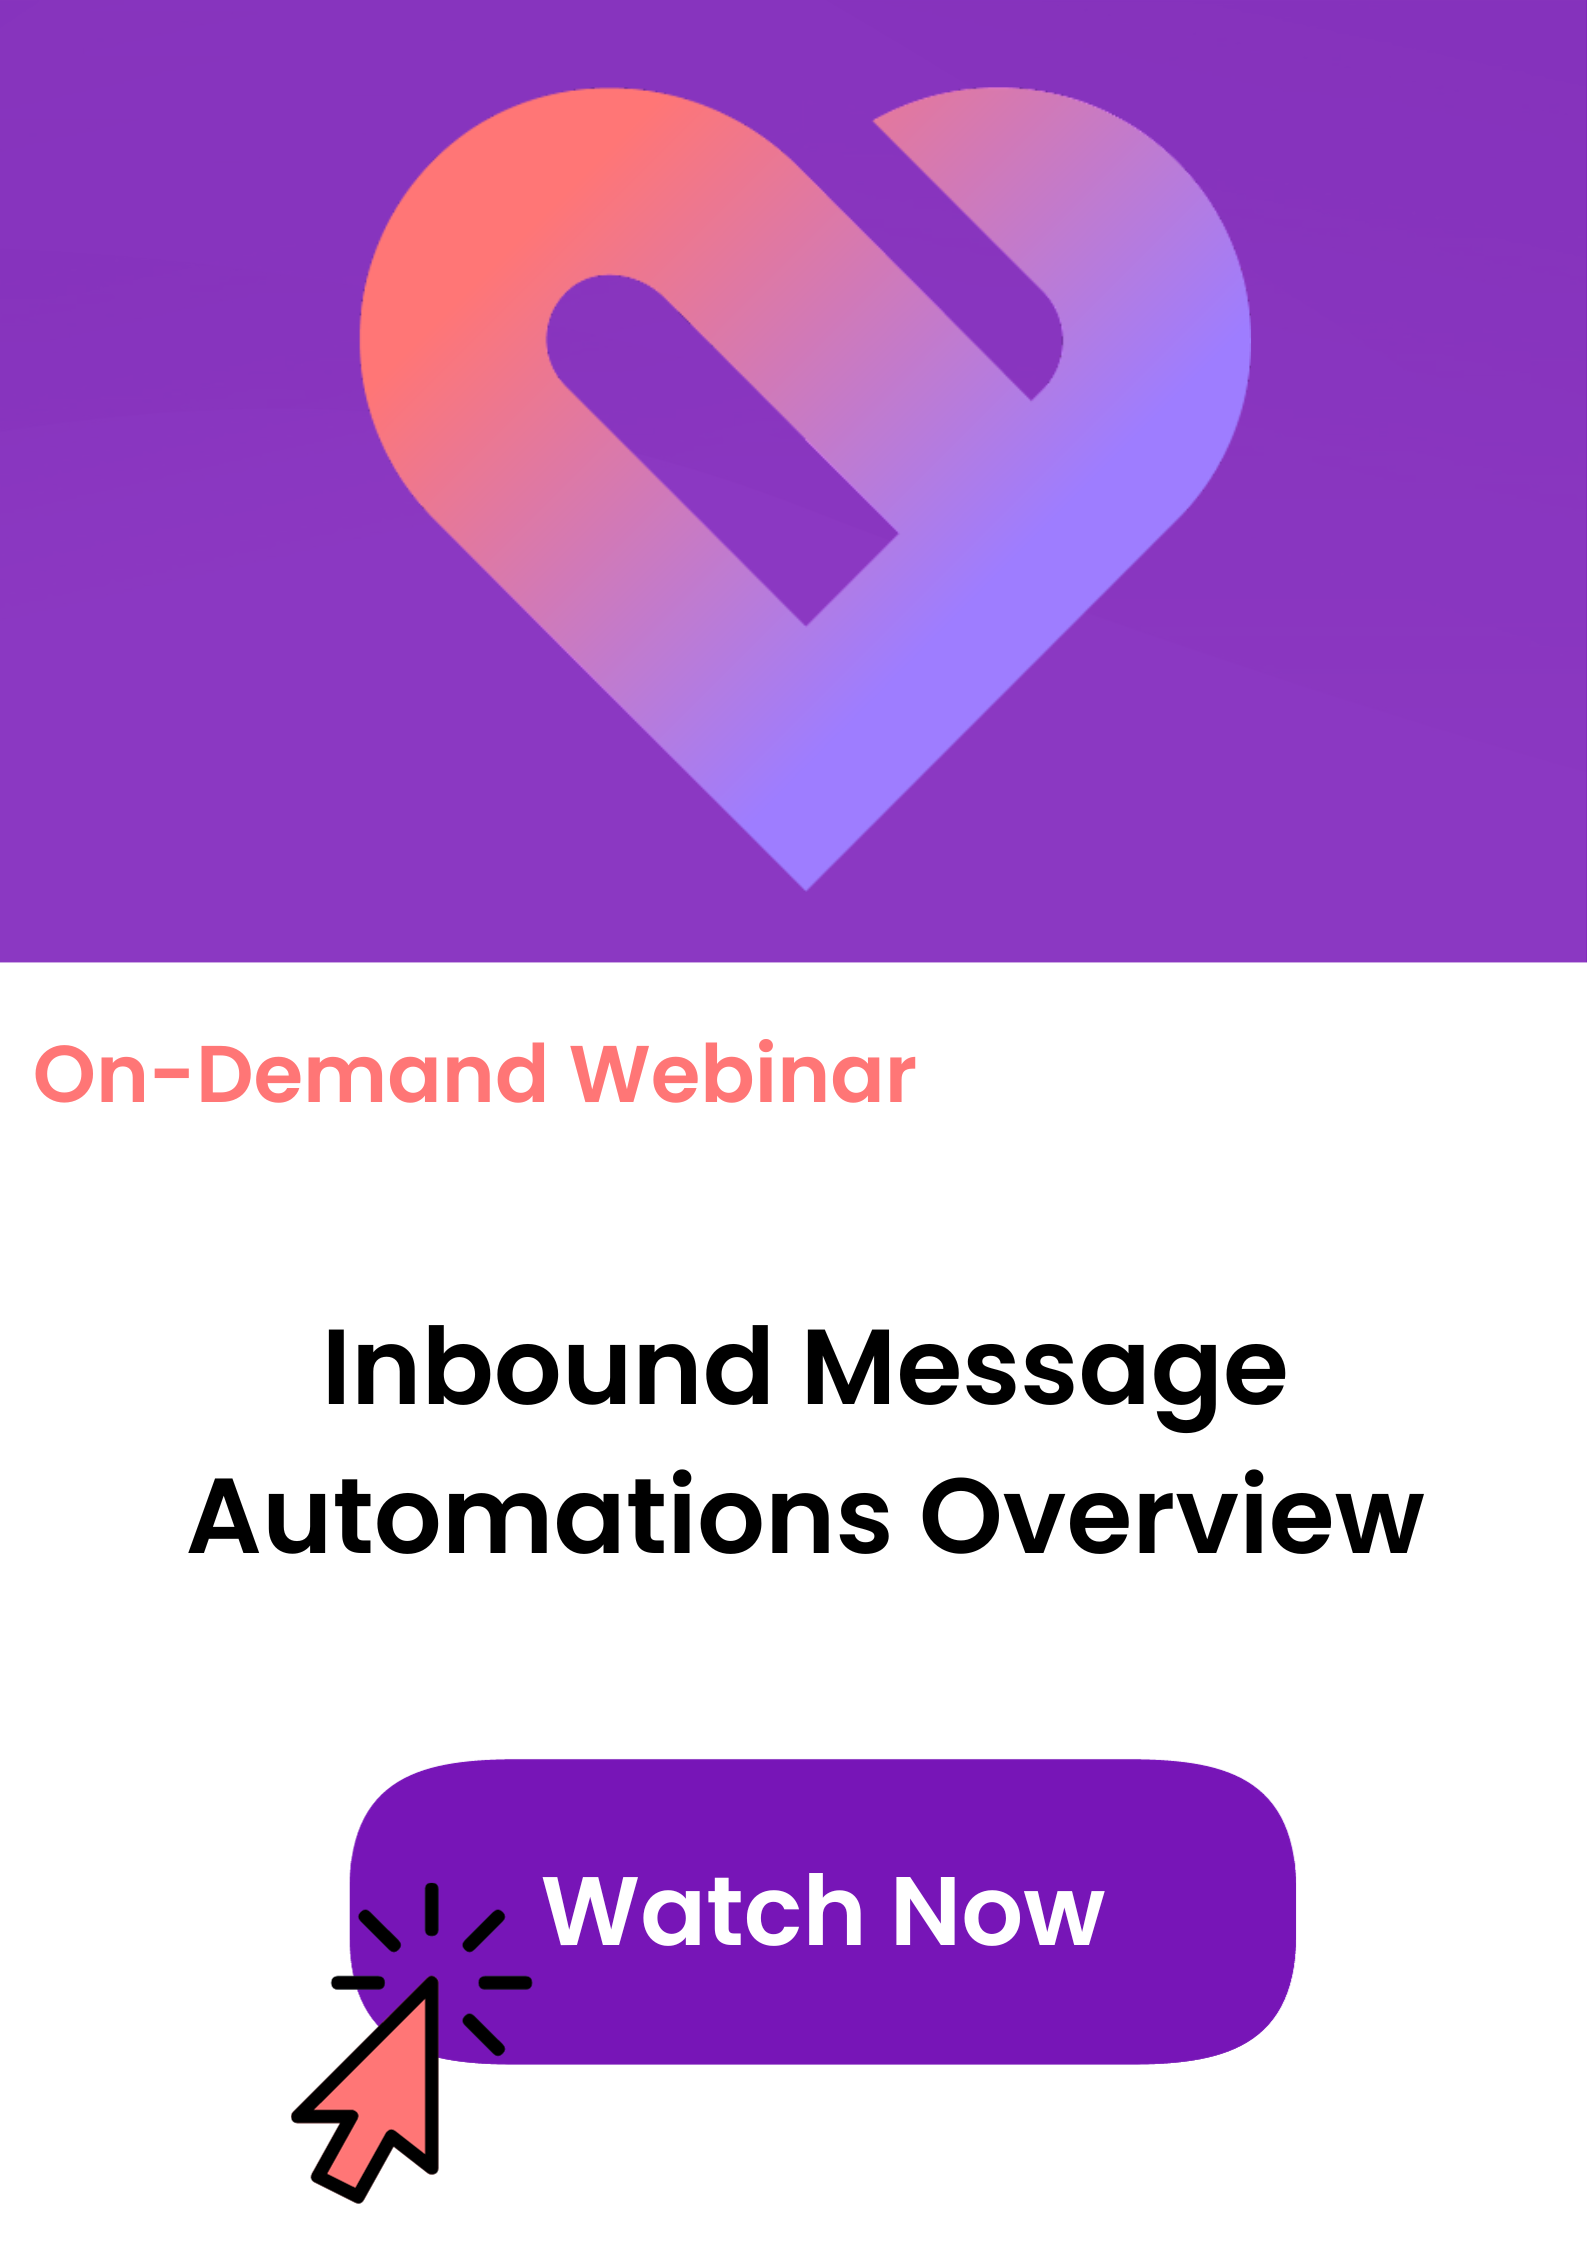 On-demand webinar tile for Inbound Message Automations Overview, click to watch now